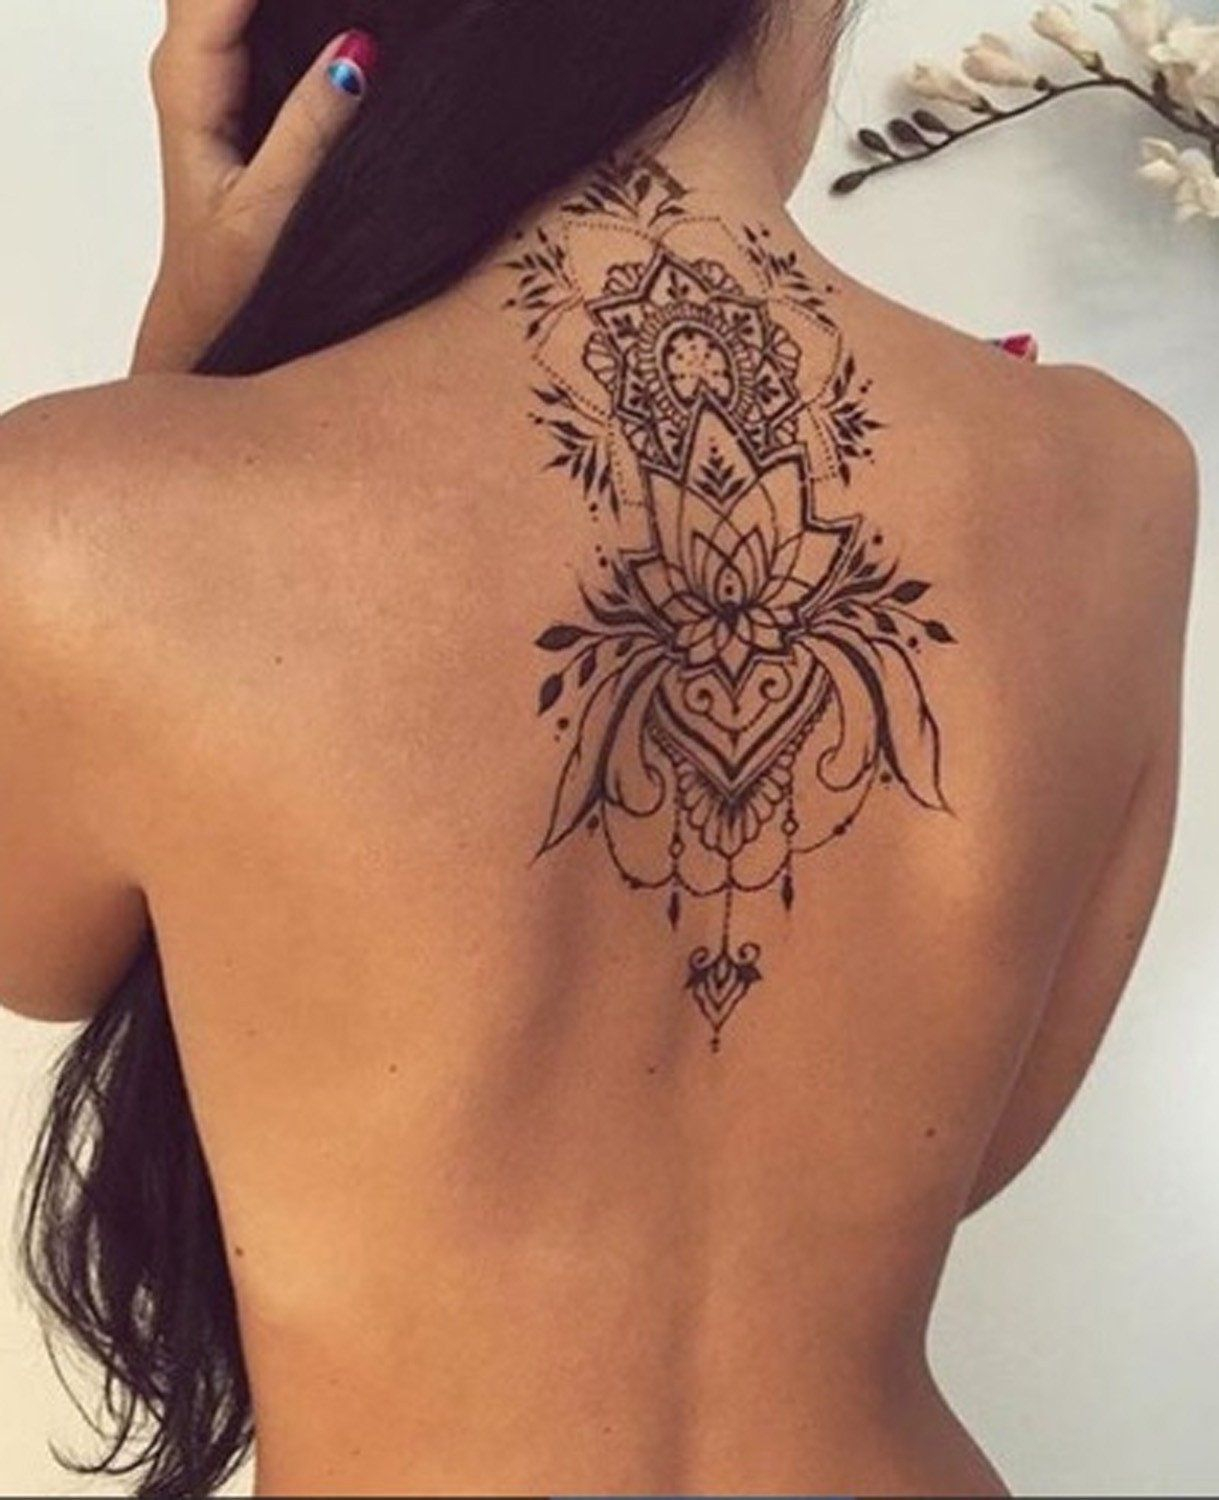 Lotus Mandala Womens Upper Back Tattoo Ideas At Mybodiart intended for dimensions 1219 X 1500